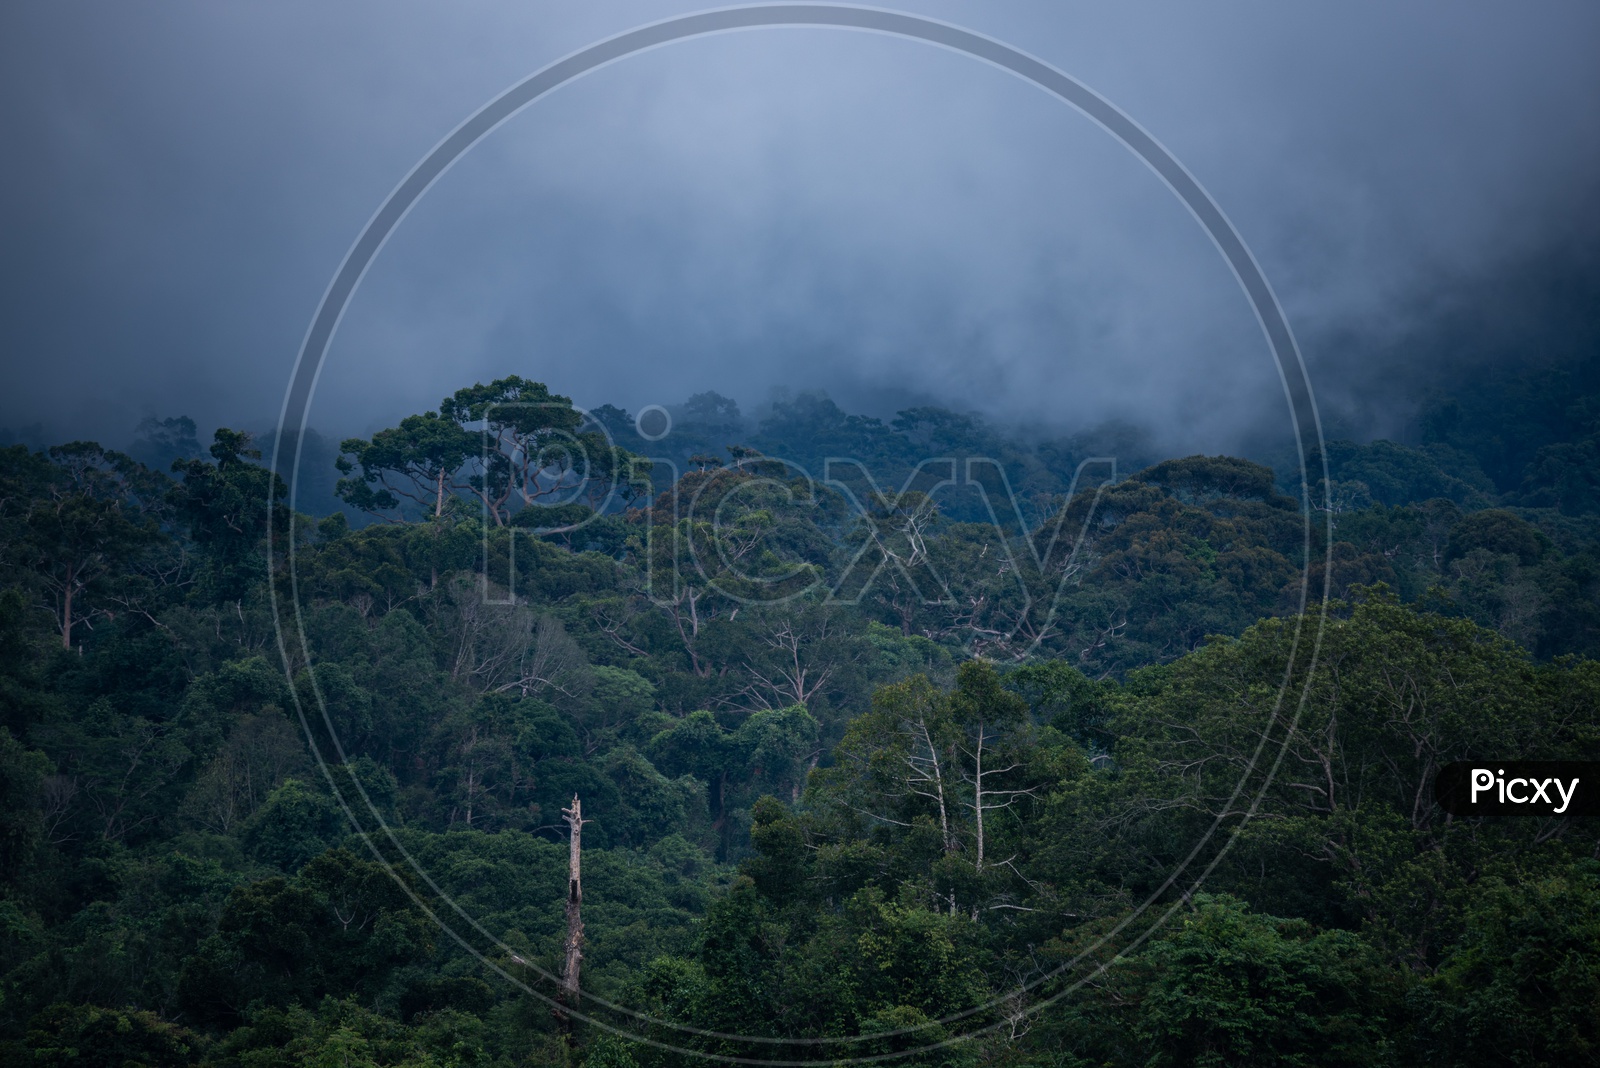 View of Tropical Forest Covered in Fog at Khao Yai National Park